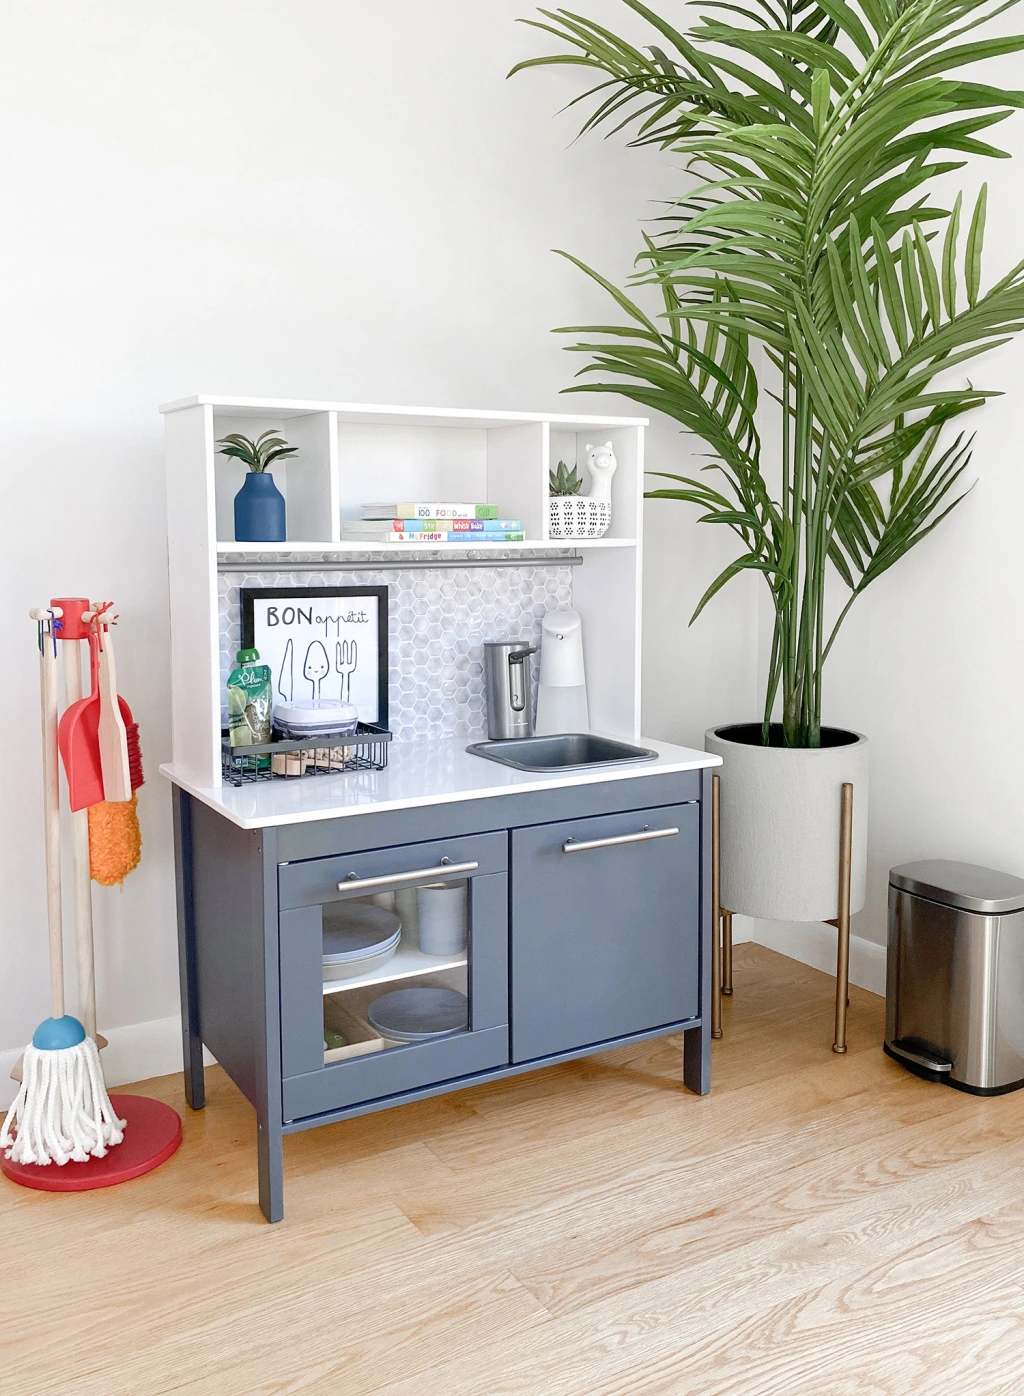 Make your IKEA Play Kitchen stylish and functional